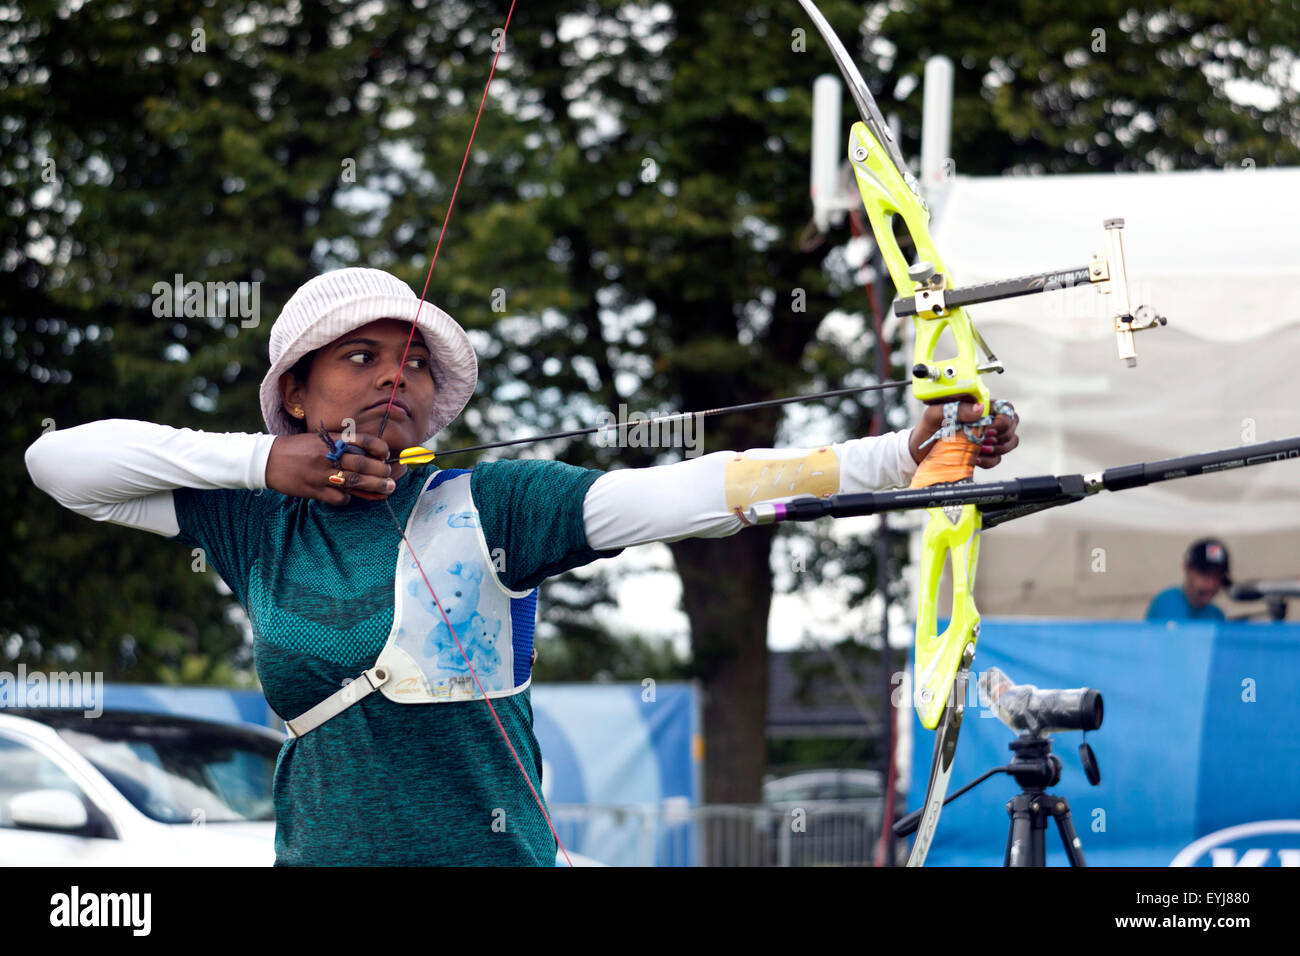 Copenhagen, Denmark, July 30th, 2015: Indian archer Laxmirani Mahji  competes in the World Archery Championships in Copenhagen during Thursday's individual matches  in recurve bow. Credit:  OJPHOTOS/Alamy Live News Stock Photo